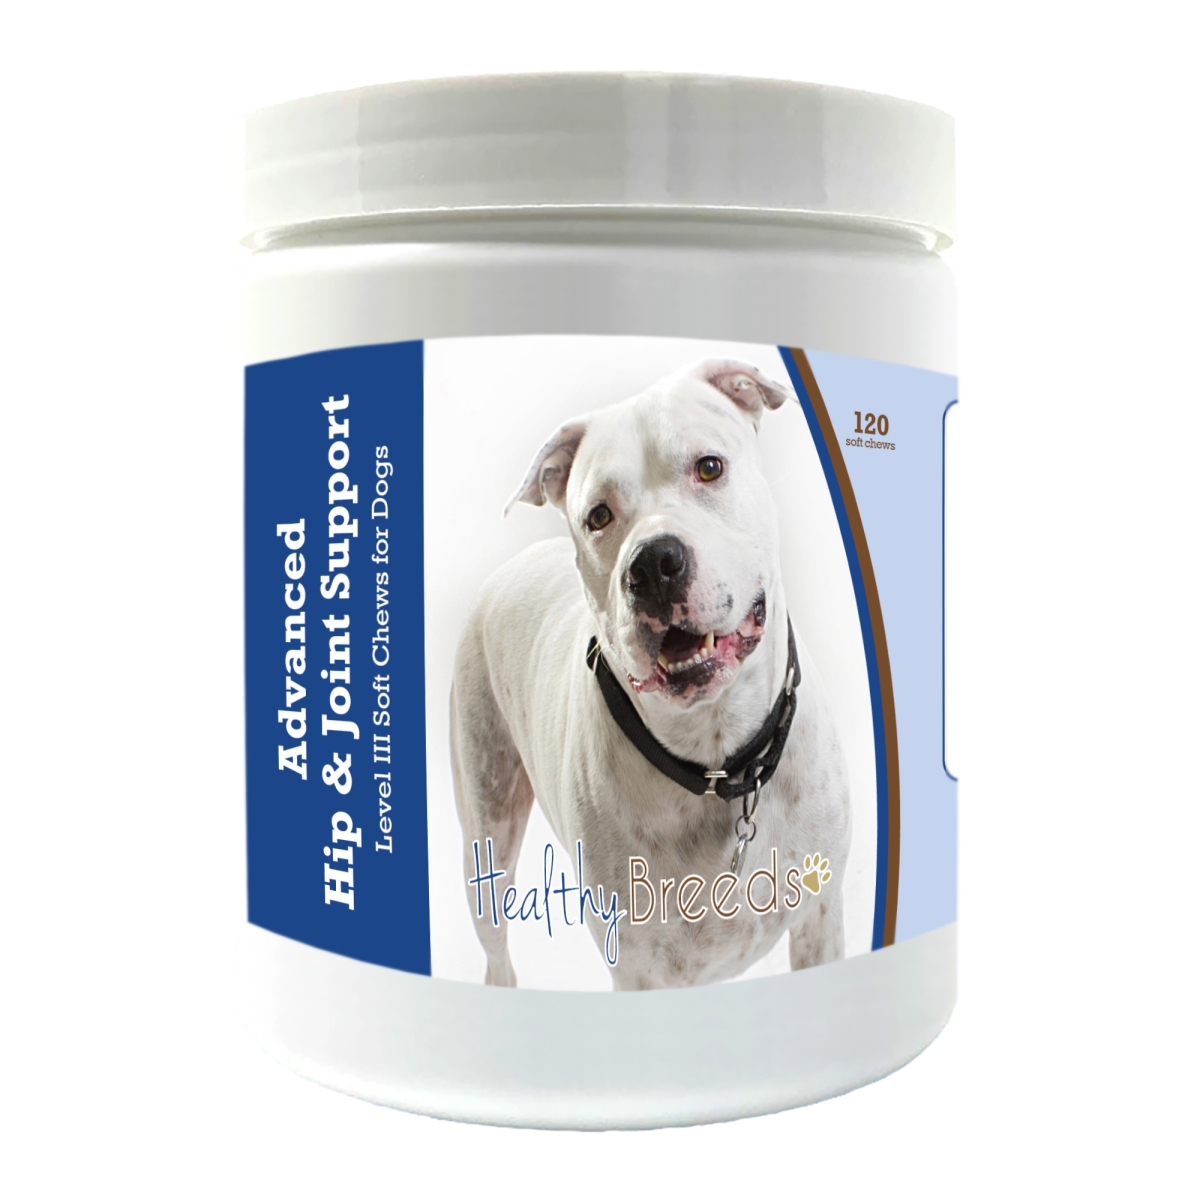 Picture of Healthy Breeds 192959898880 Pit Bull Advanced Hip & Joint Support Level III Soft Chews for Dogs